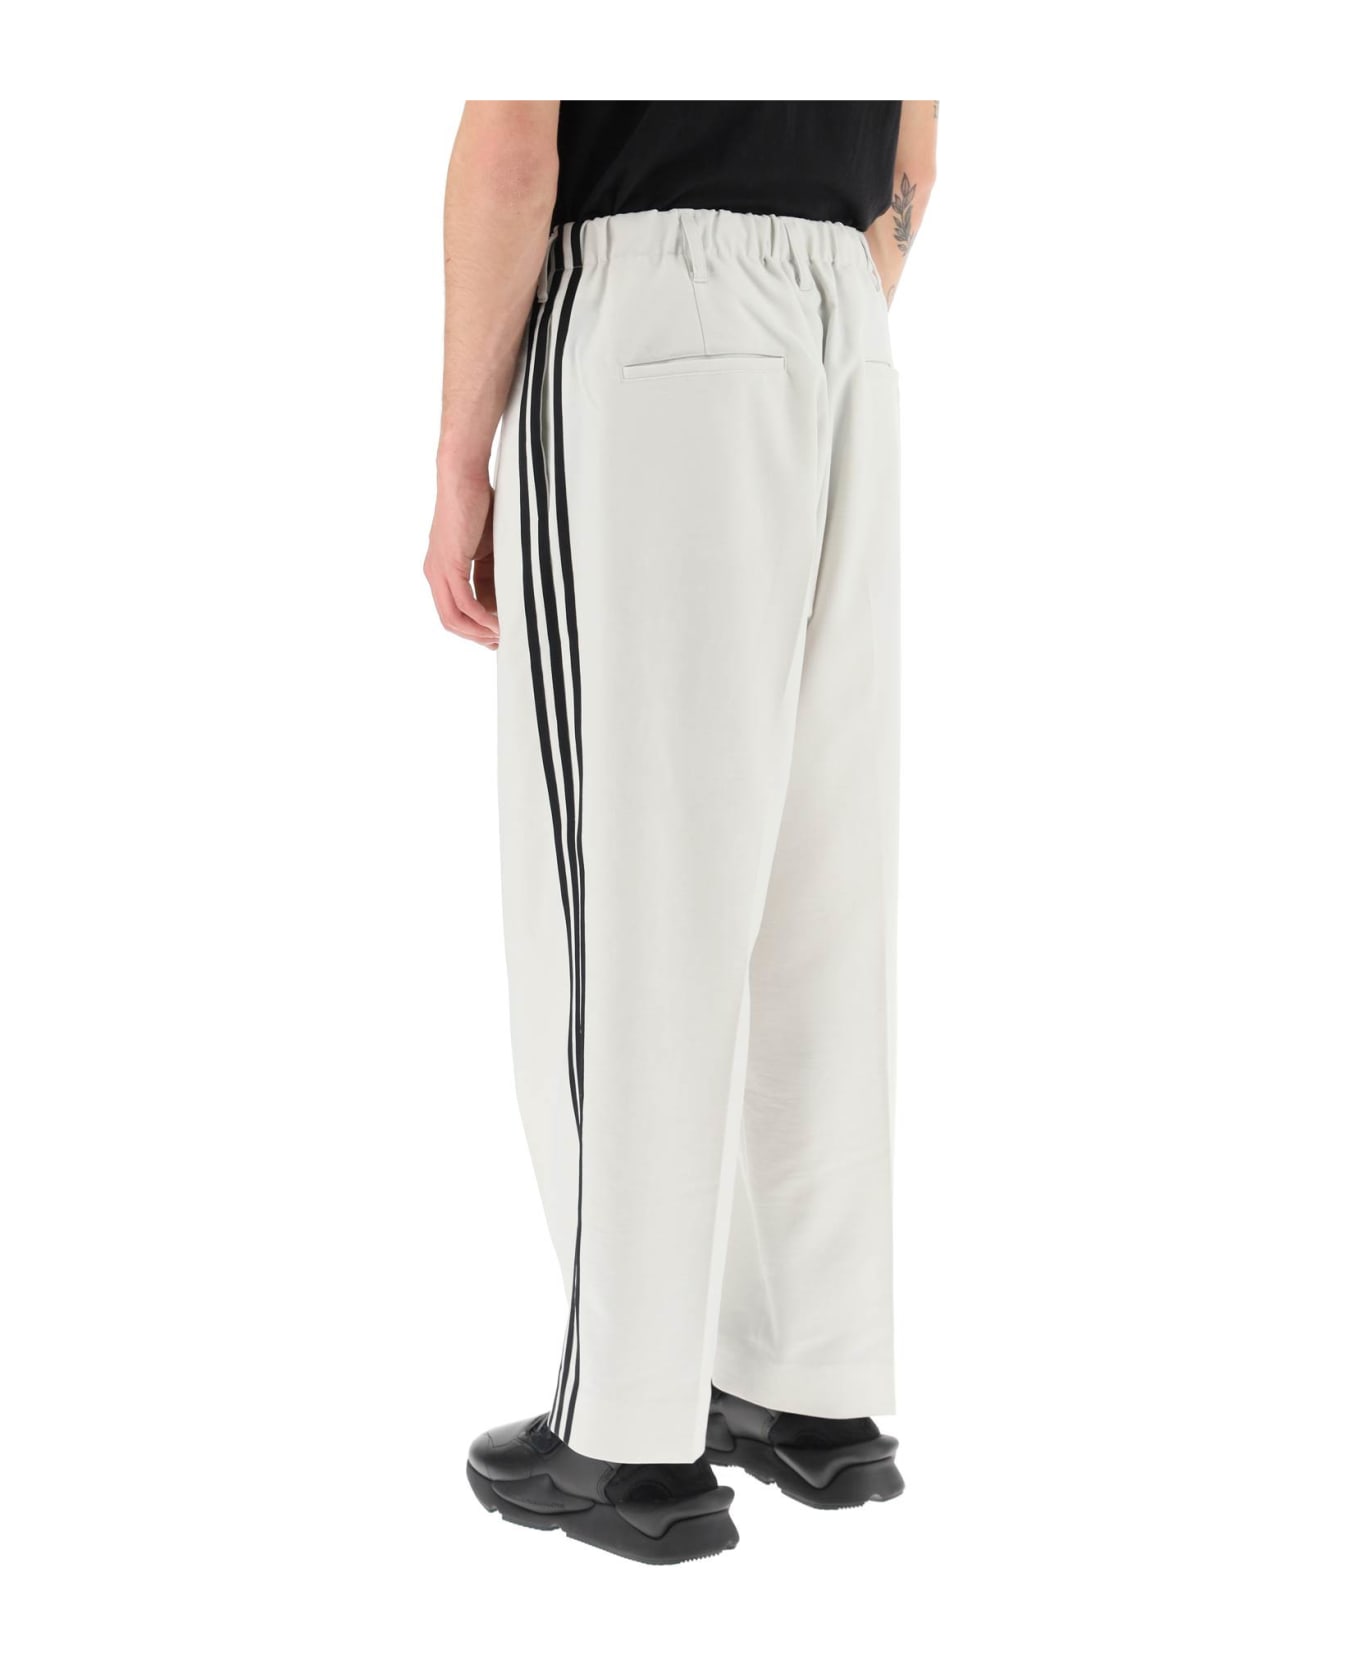 Y-3 Lightweight Twill Pants With Side Stripes - ORBIT GREY (White)